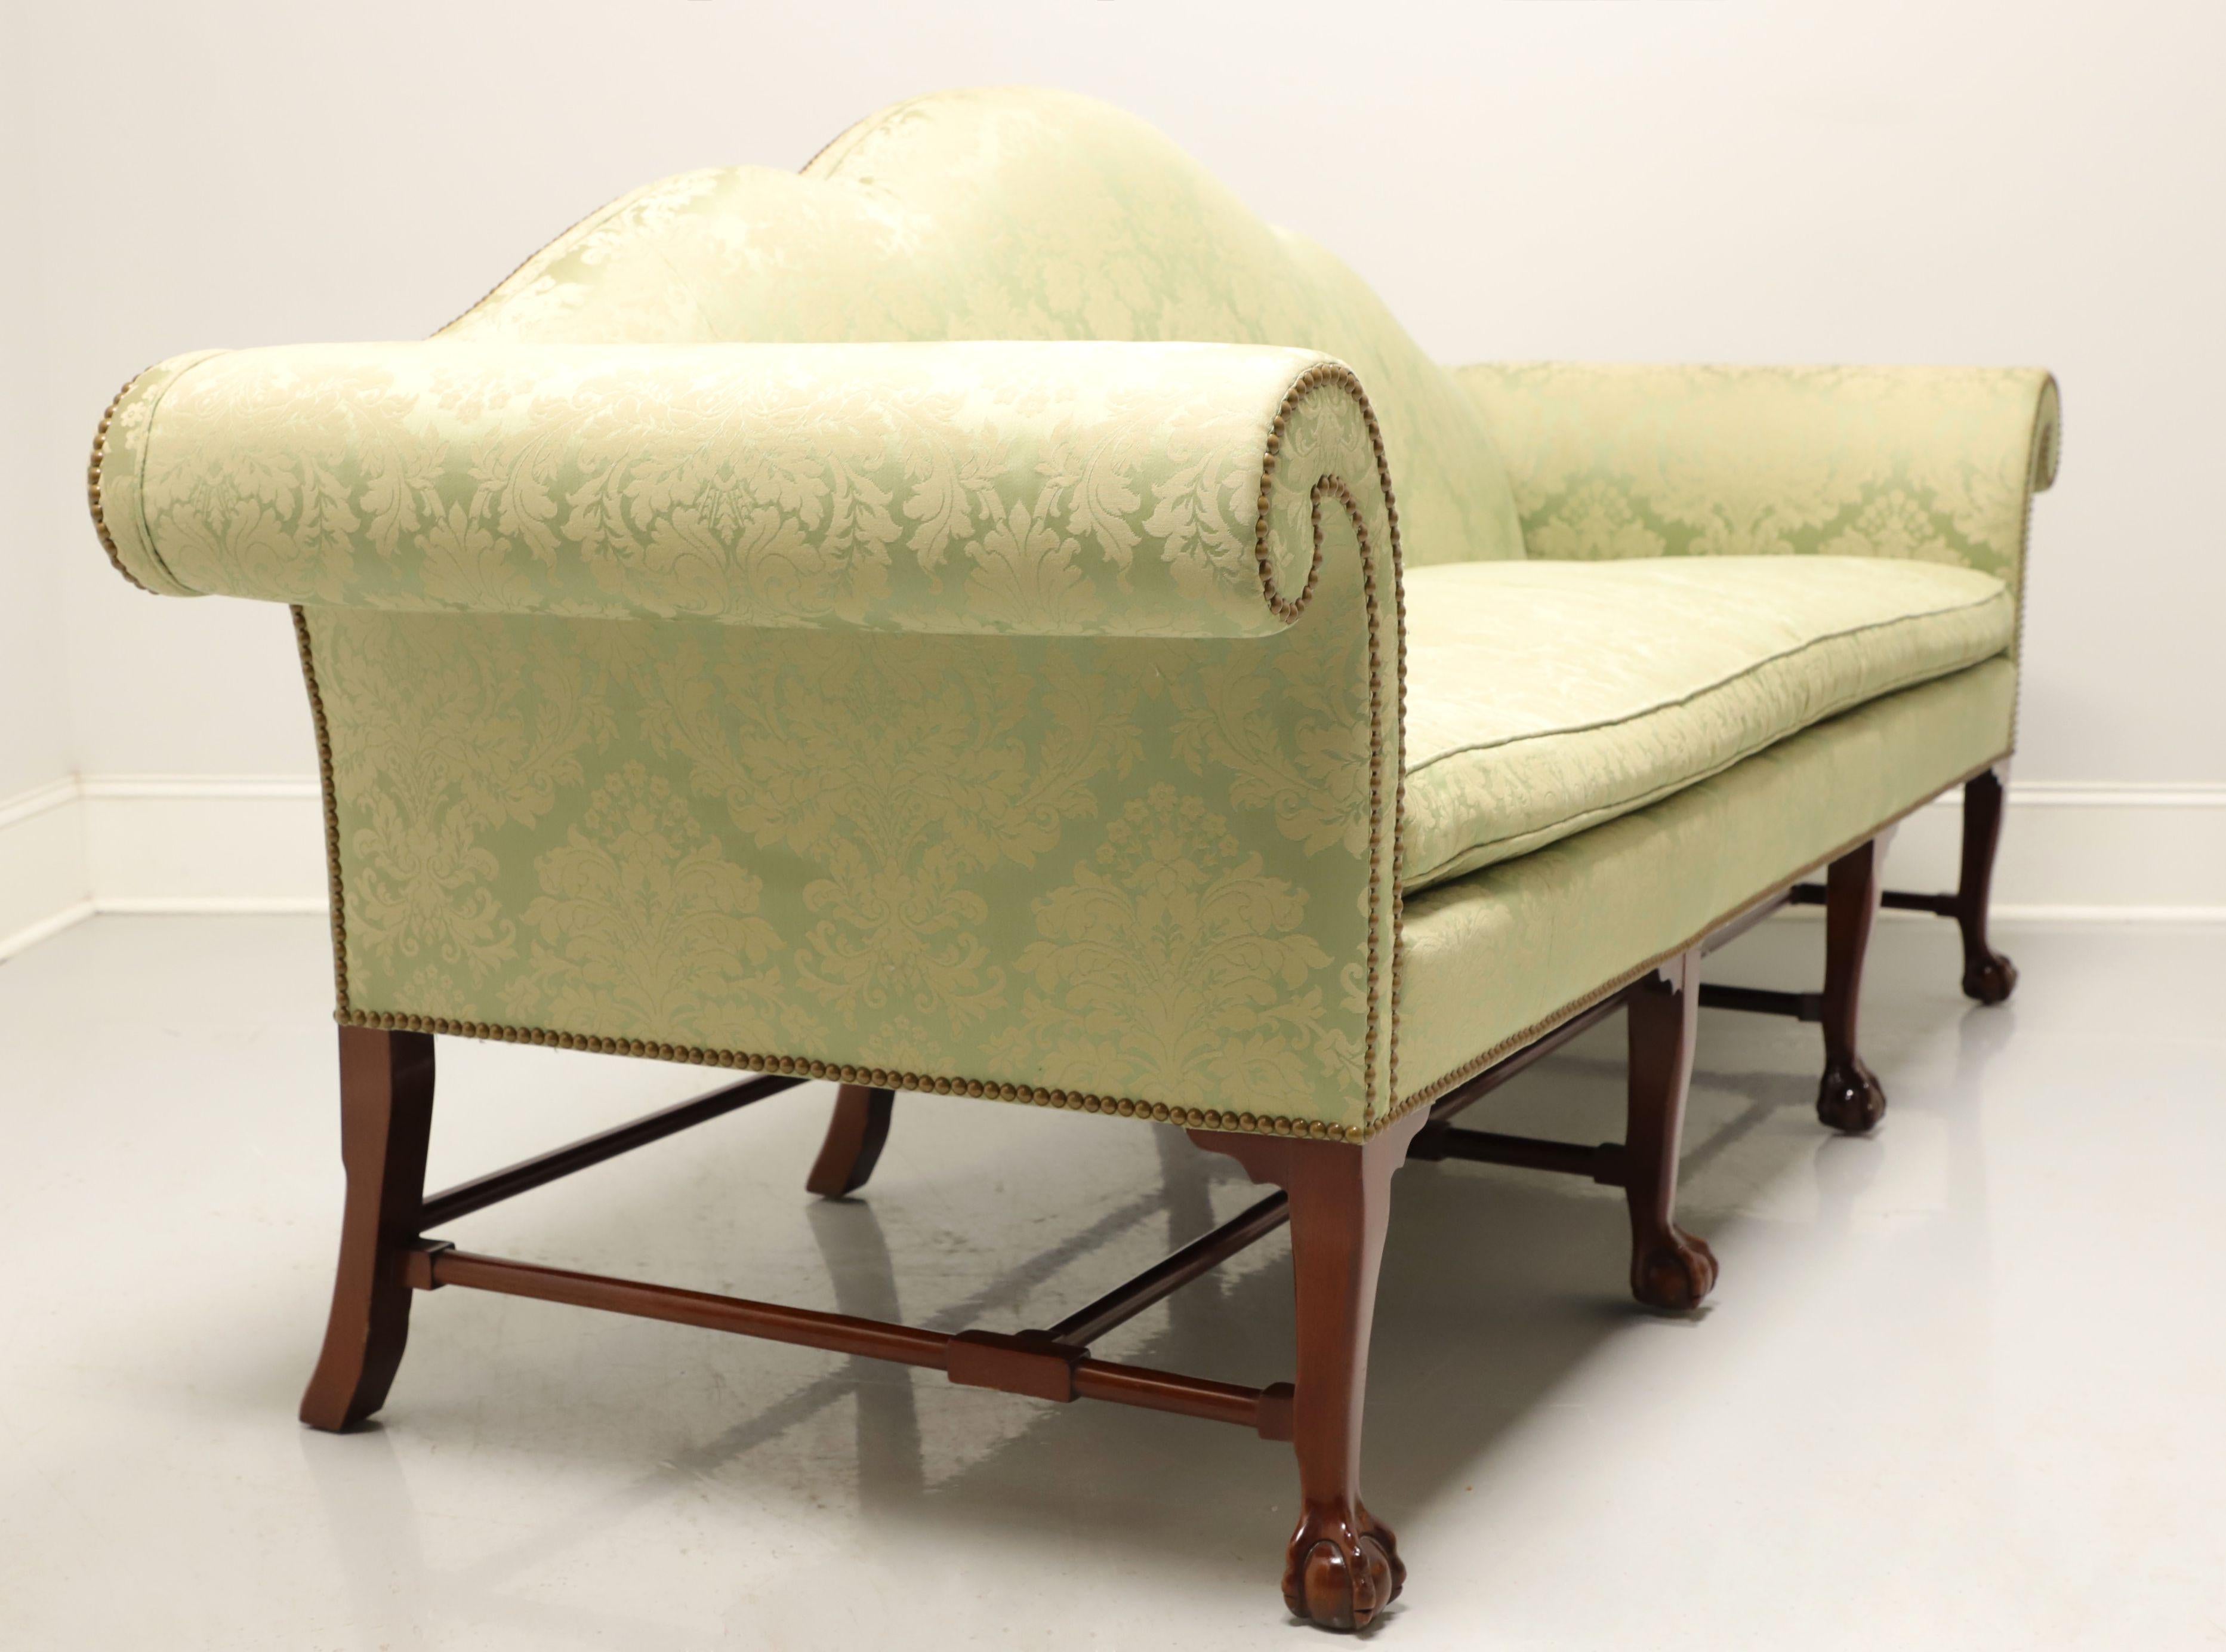 A reproduction of an 18th Century Georgian style camel back sofa by Kindel Furniture, from their Irish Georgian Collection. Mahogany frame, camel back, rolled arms, single reversible seat cushion, brass nail head trim, stretcher base and four front